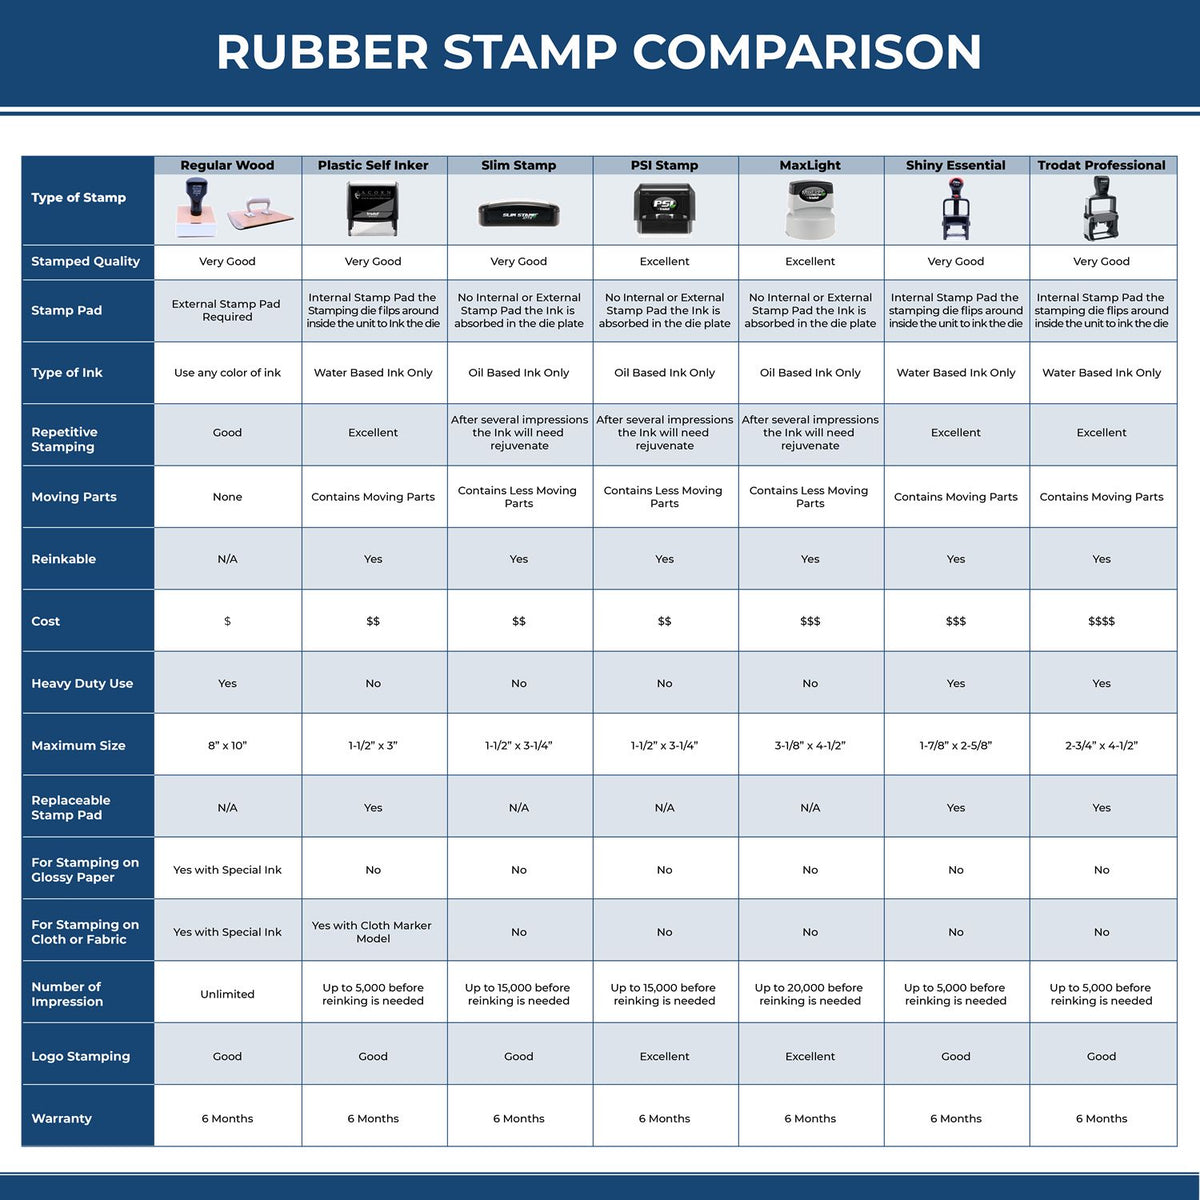 Large Investments Rubber Stamp 4568R Rubber Stamp Comparison